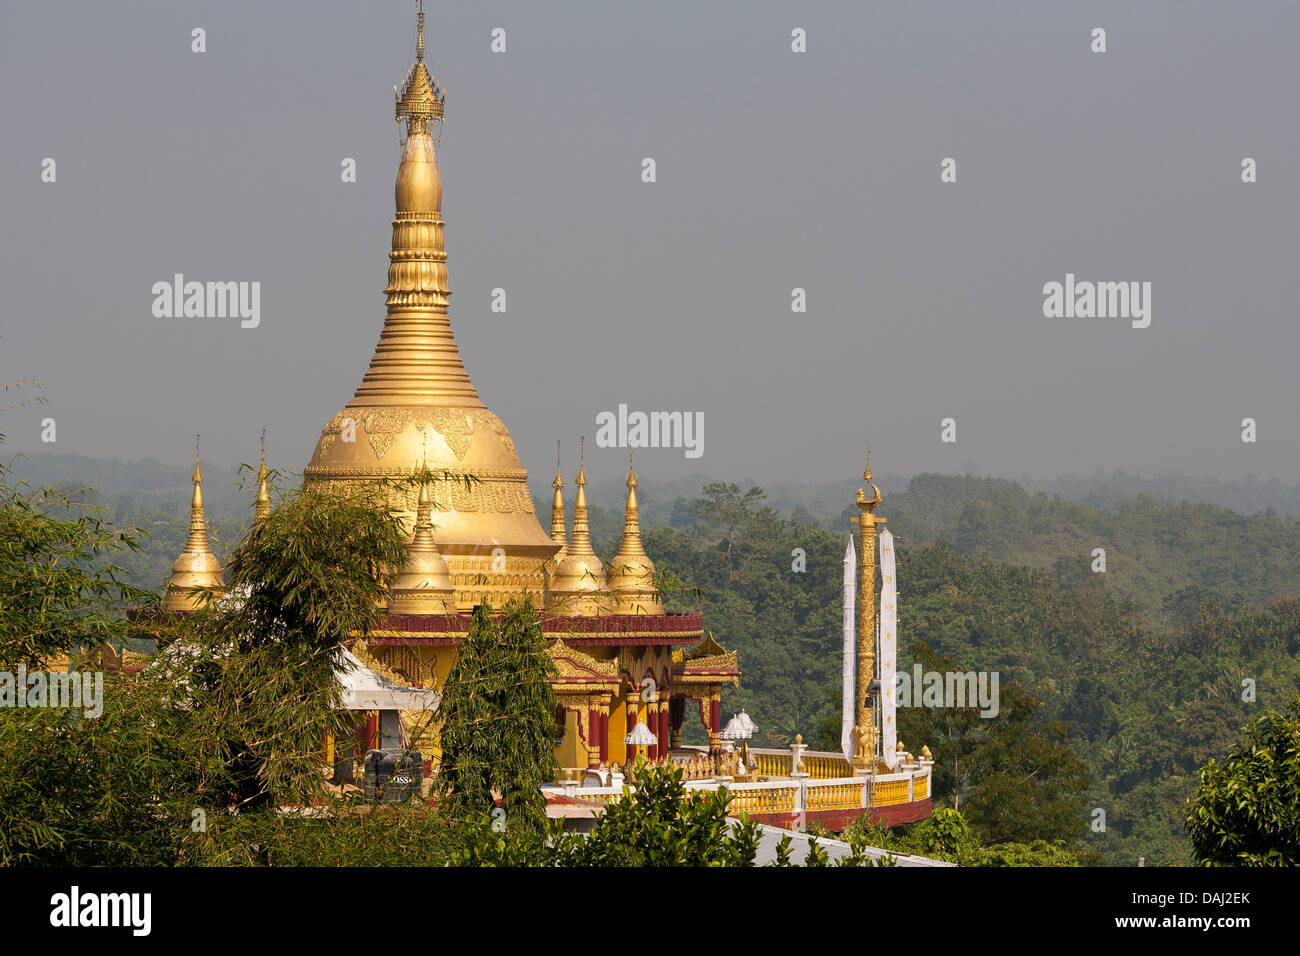 The golden temple, a reknown and famous Buddhist monastery close to Banderban in the Chittagong Hill Tracts of Bangladesh Stock Photo